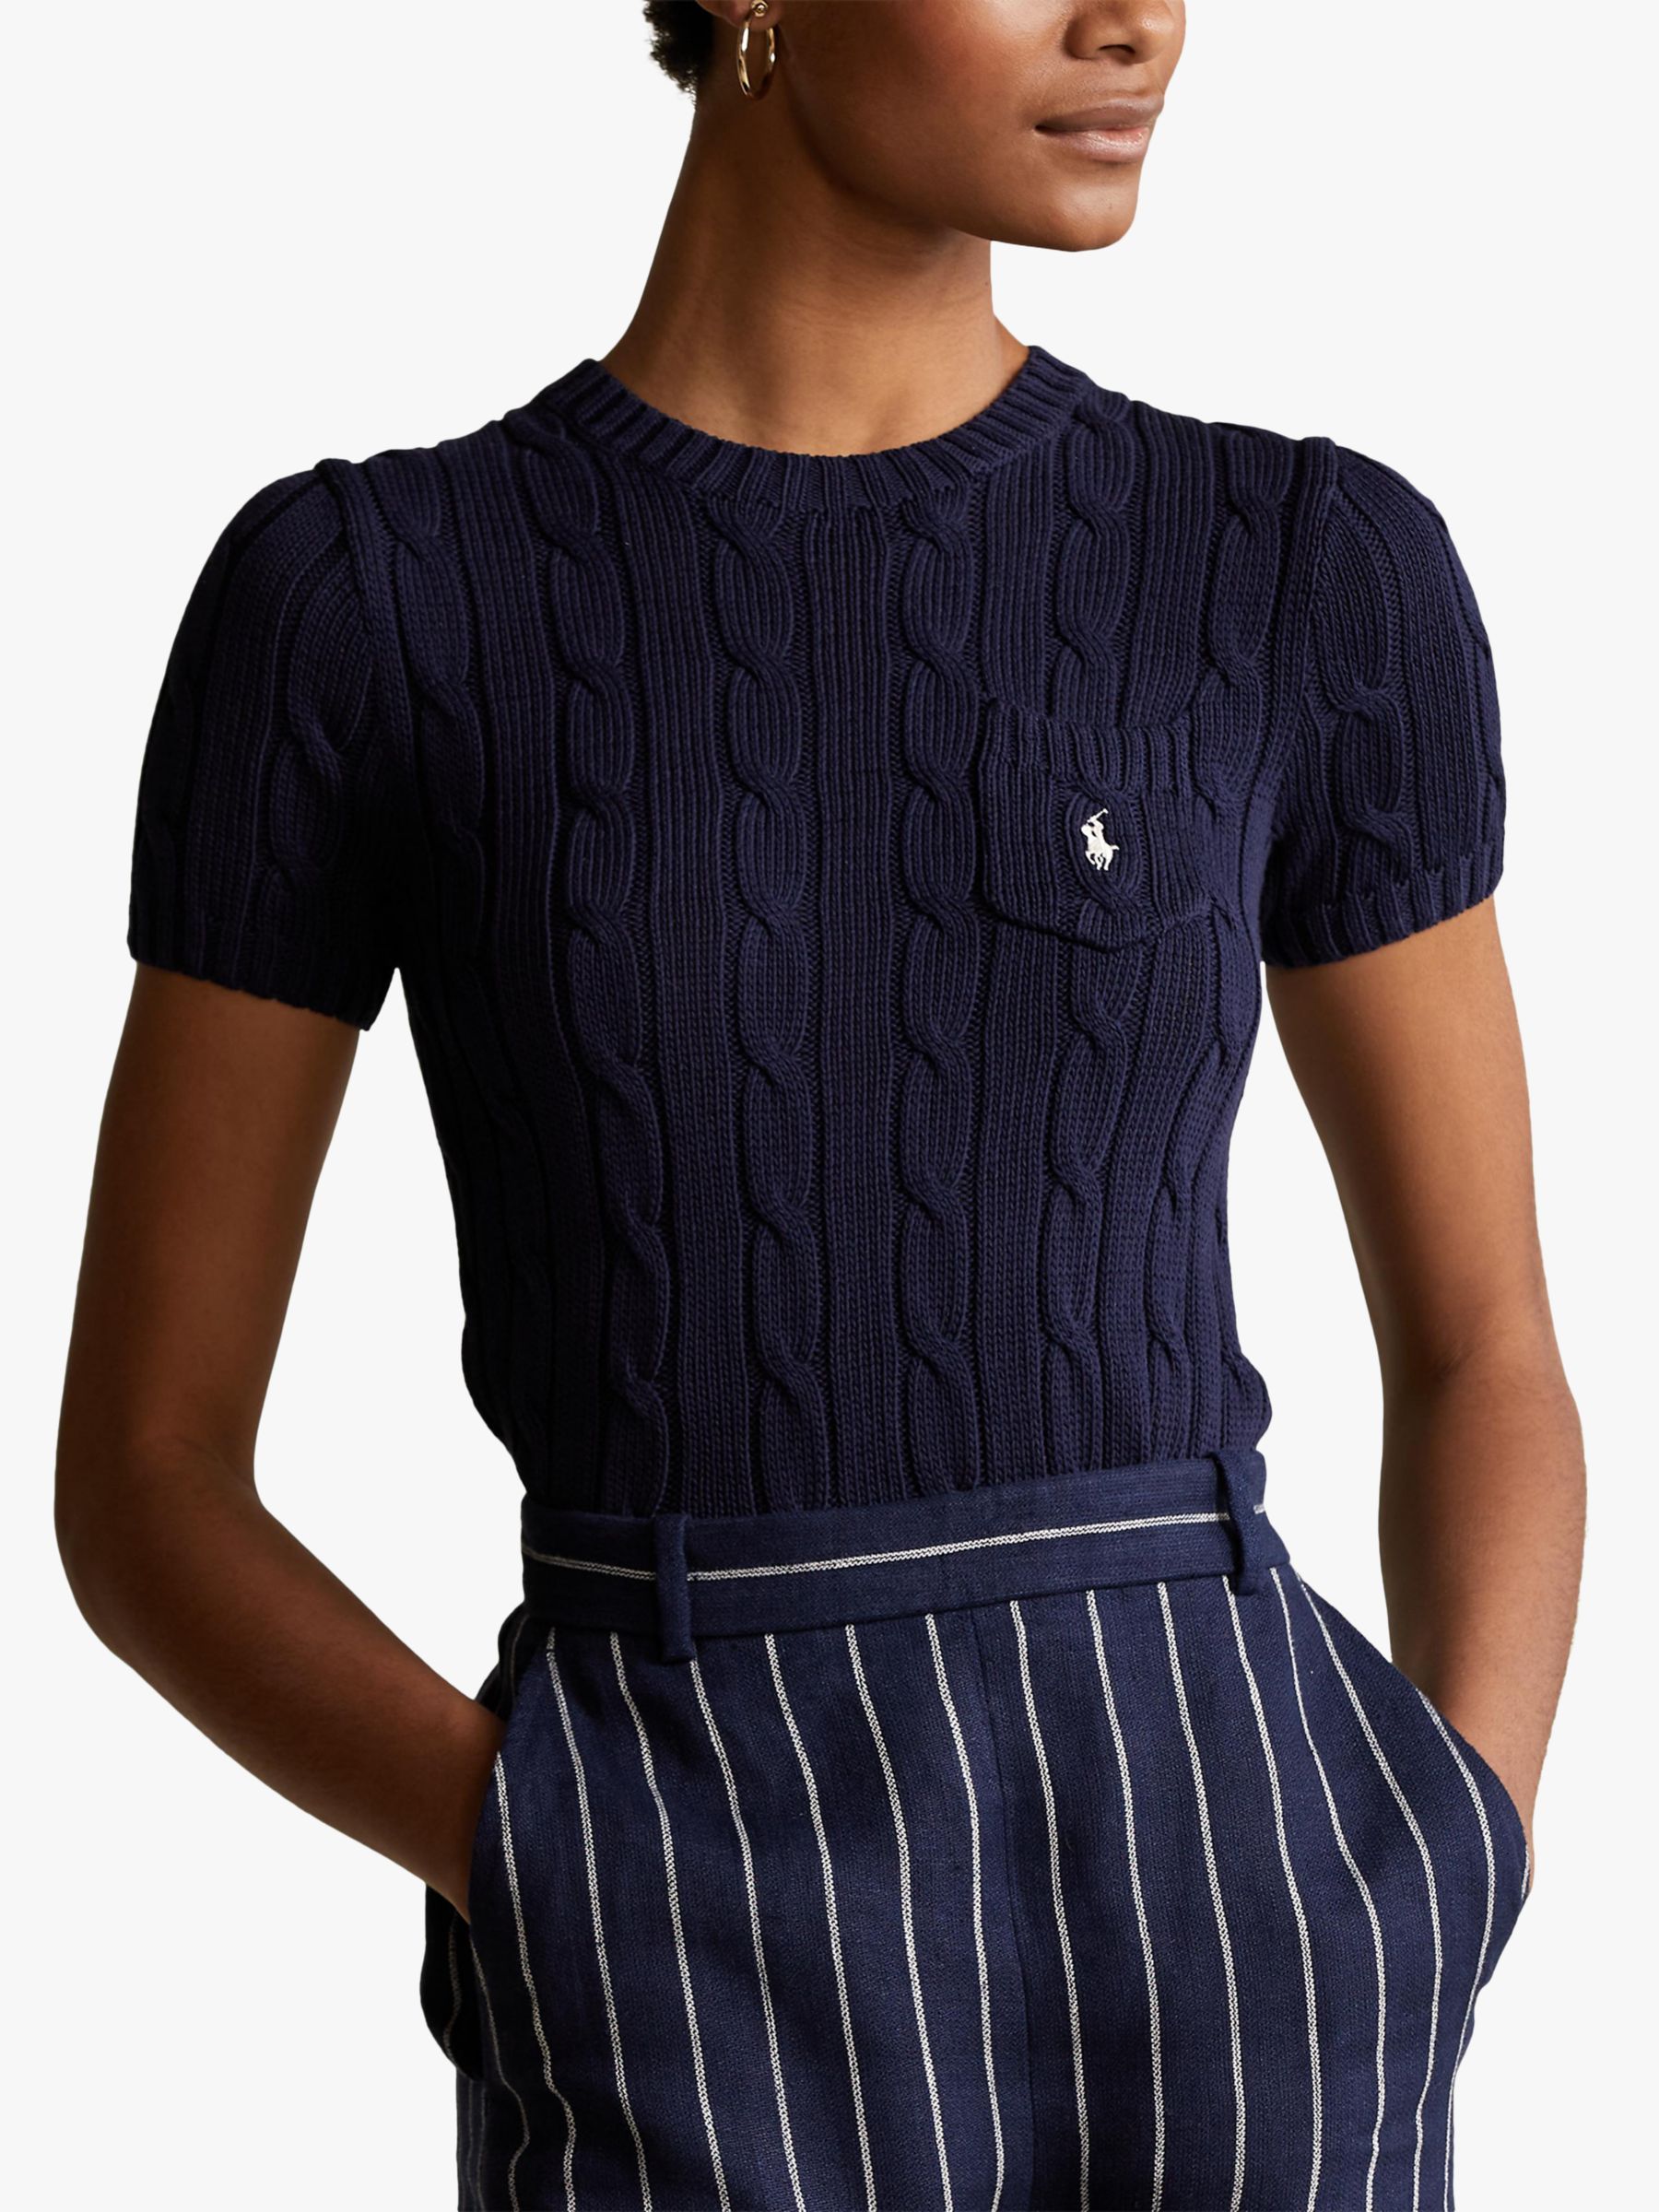 Polo Ralph Lauren Cable Knit Short Sleeve Top, Hunter Navy